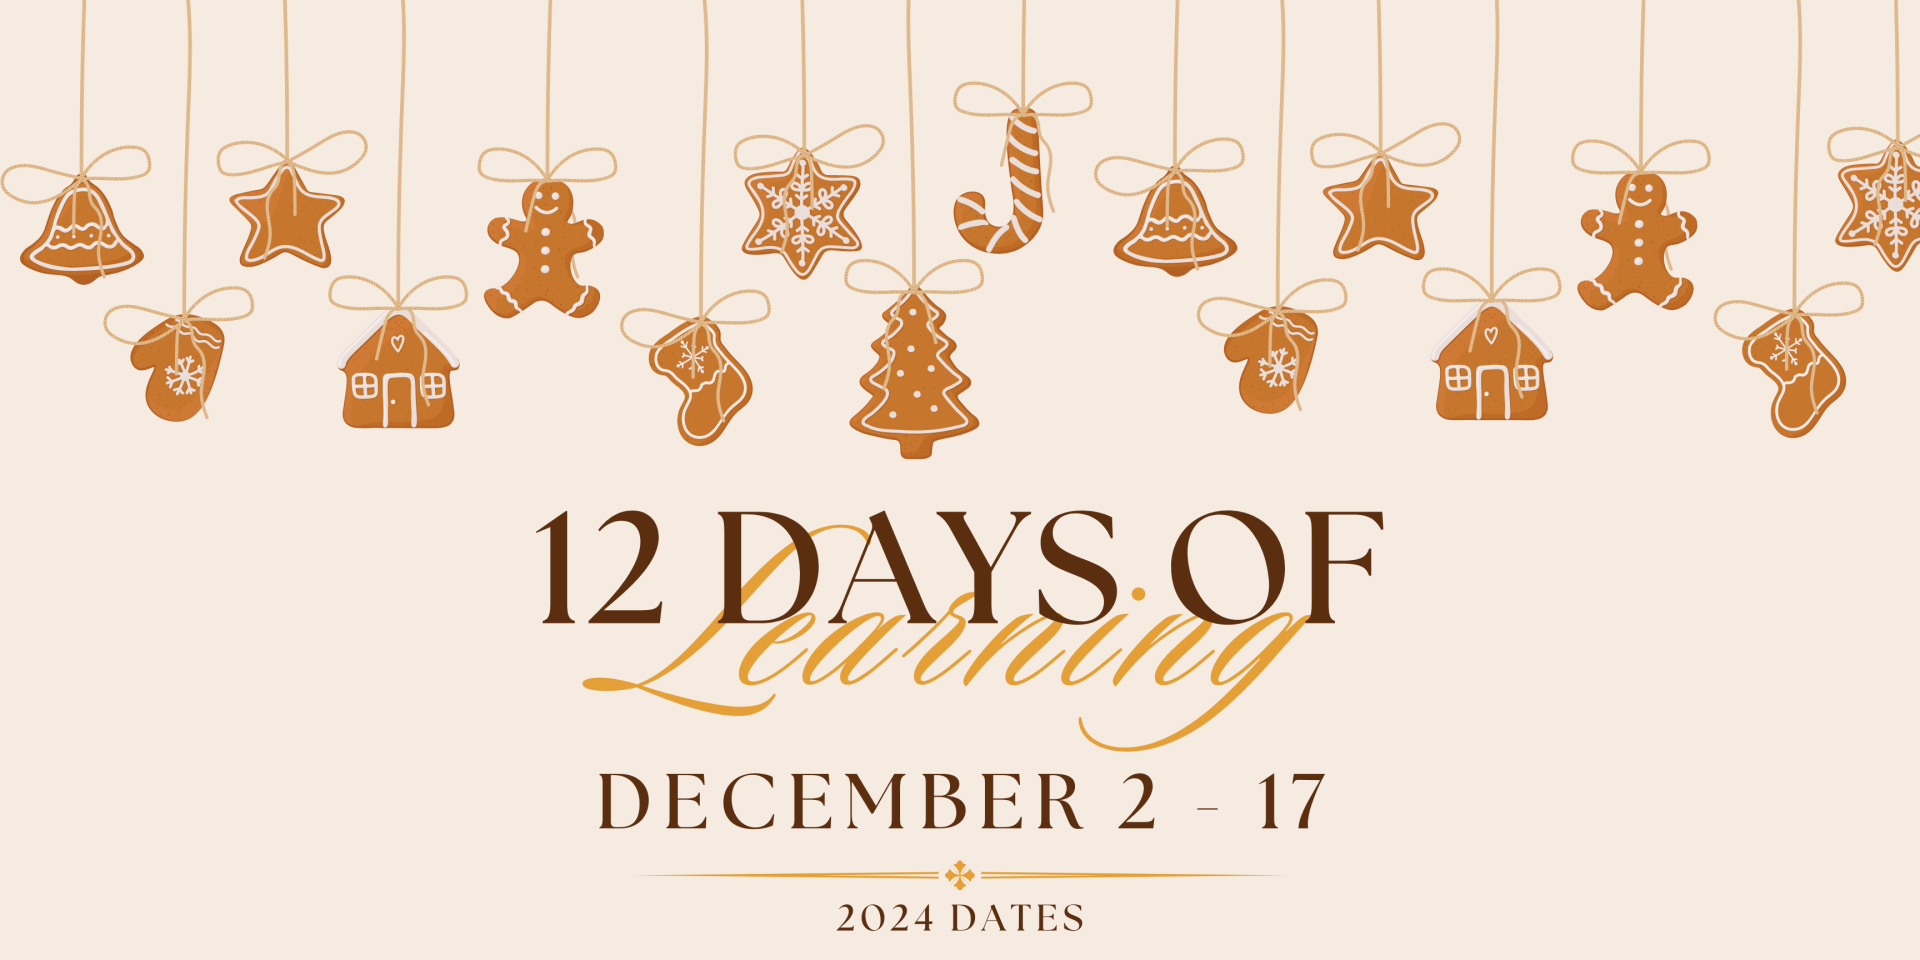 12 Days of Learning - December 2-17, 2024